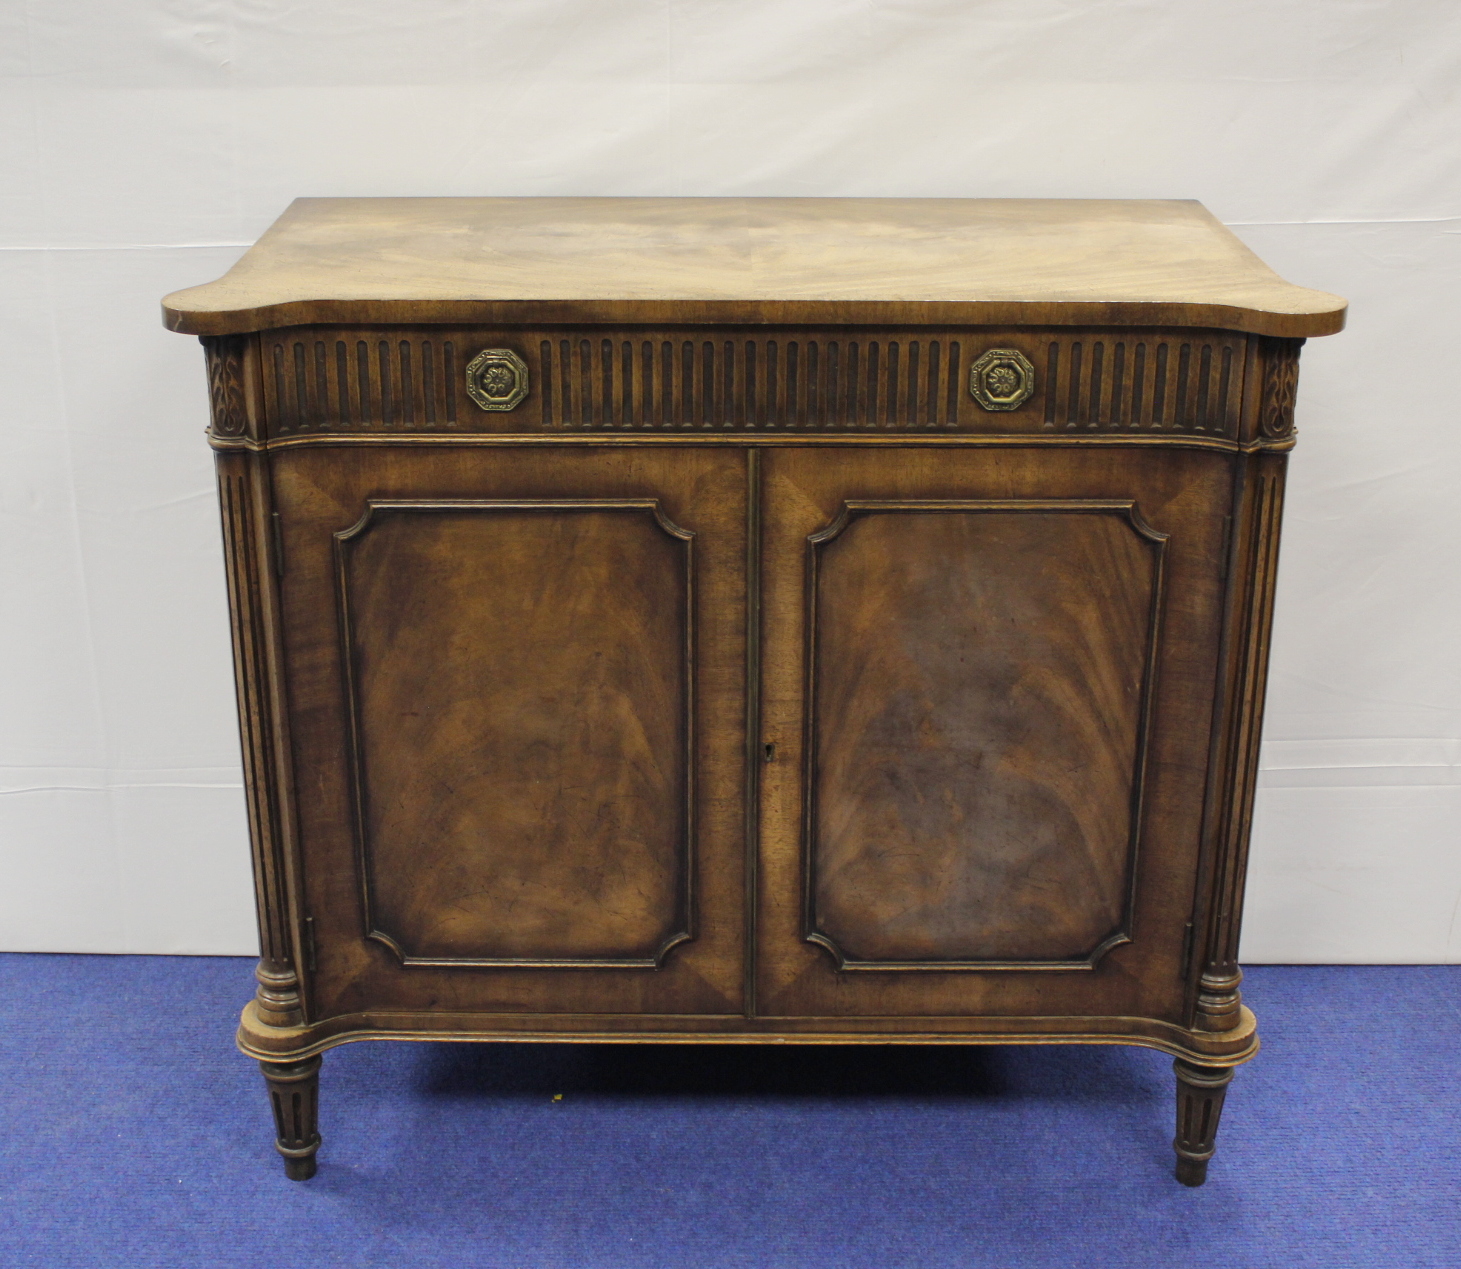 Edwardian mahogany cabinet with a pair of panelled doors  85cm wide, 82cm high, 45cm deep